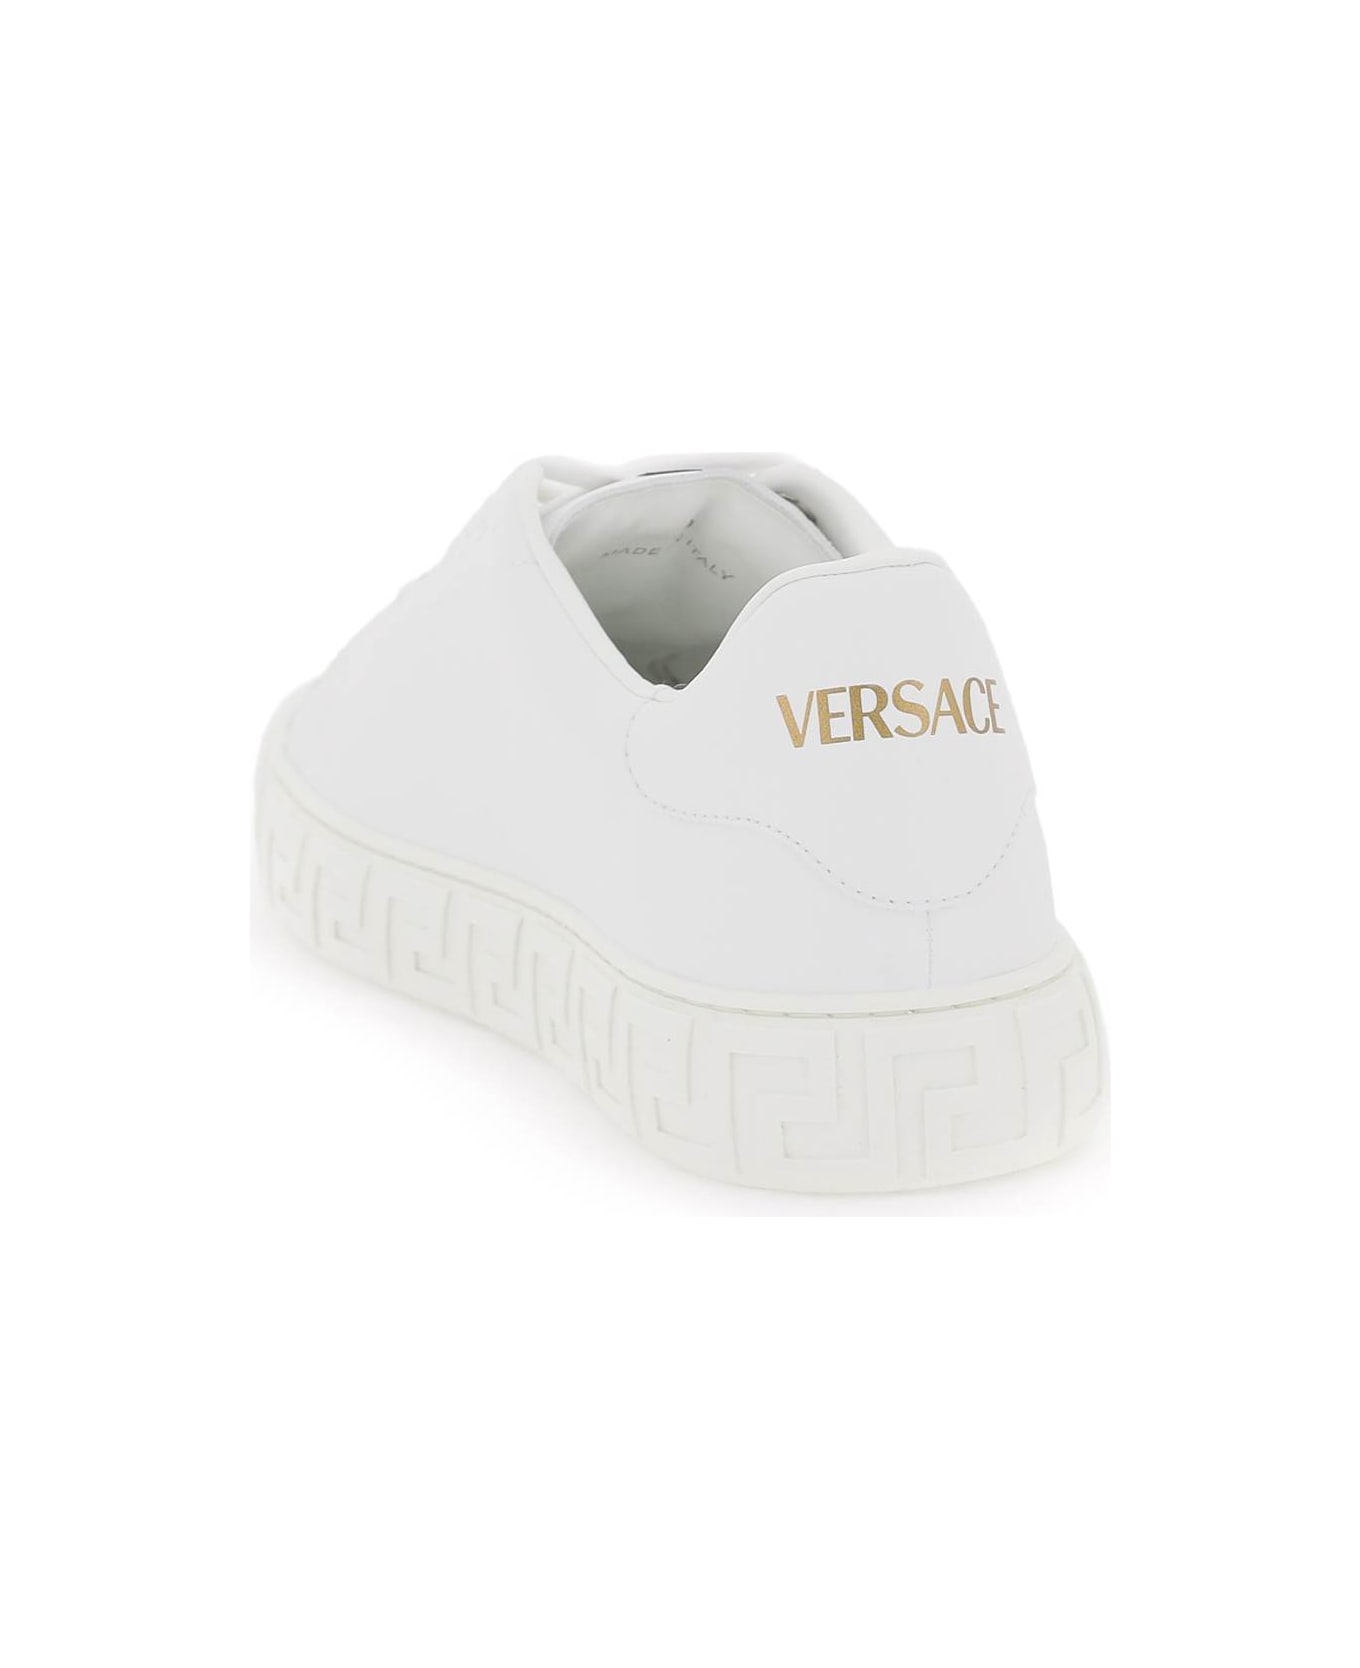 Versace White Leather Sneakers - White スニーカー